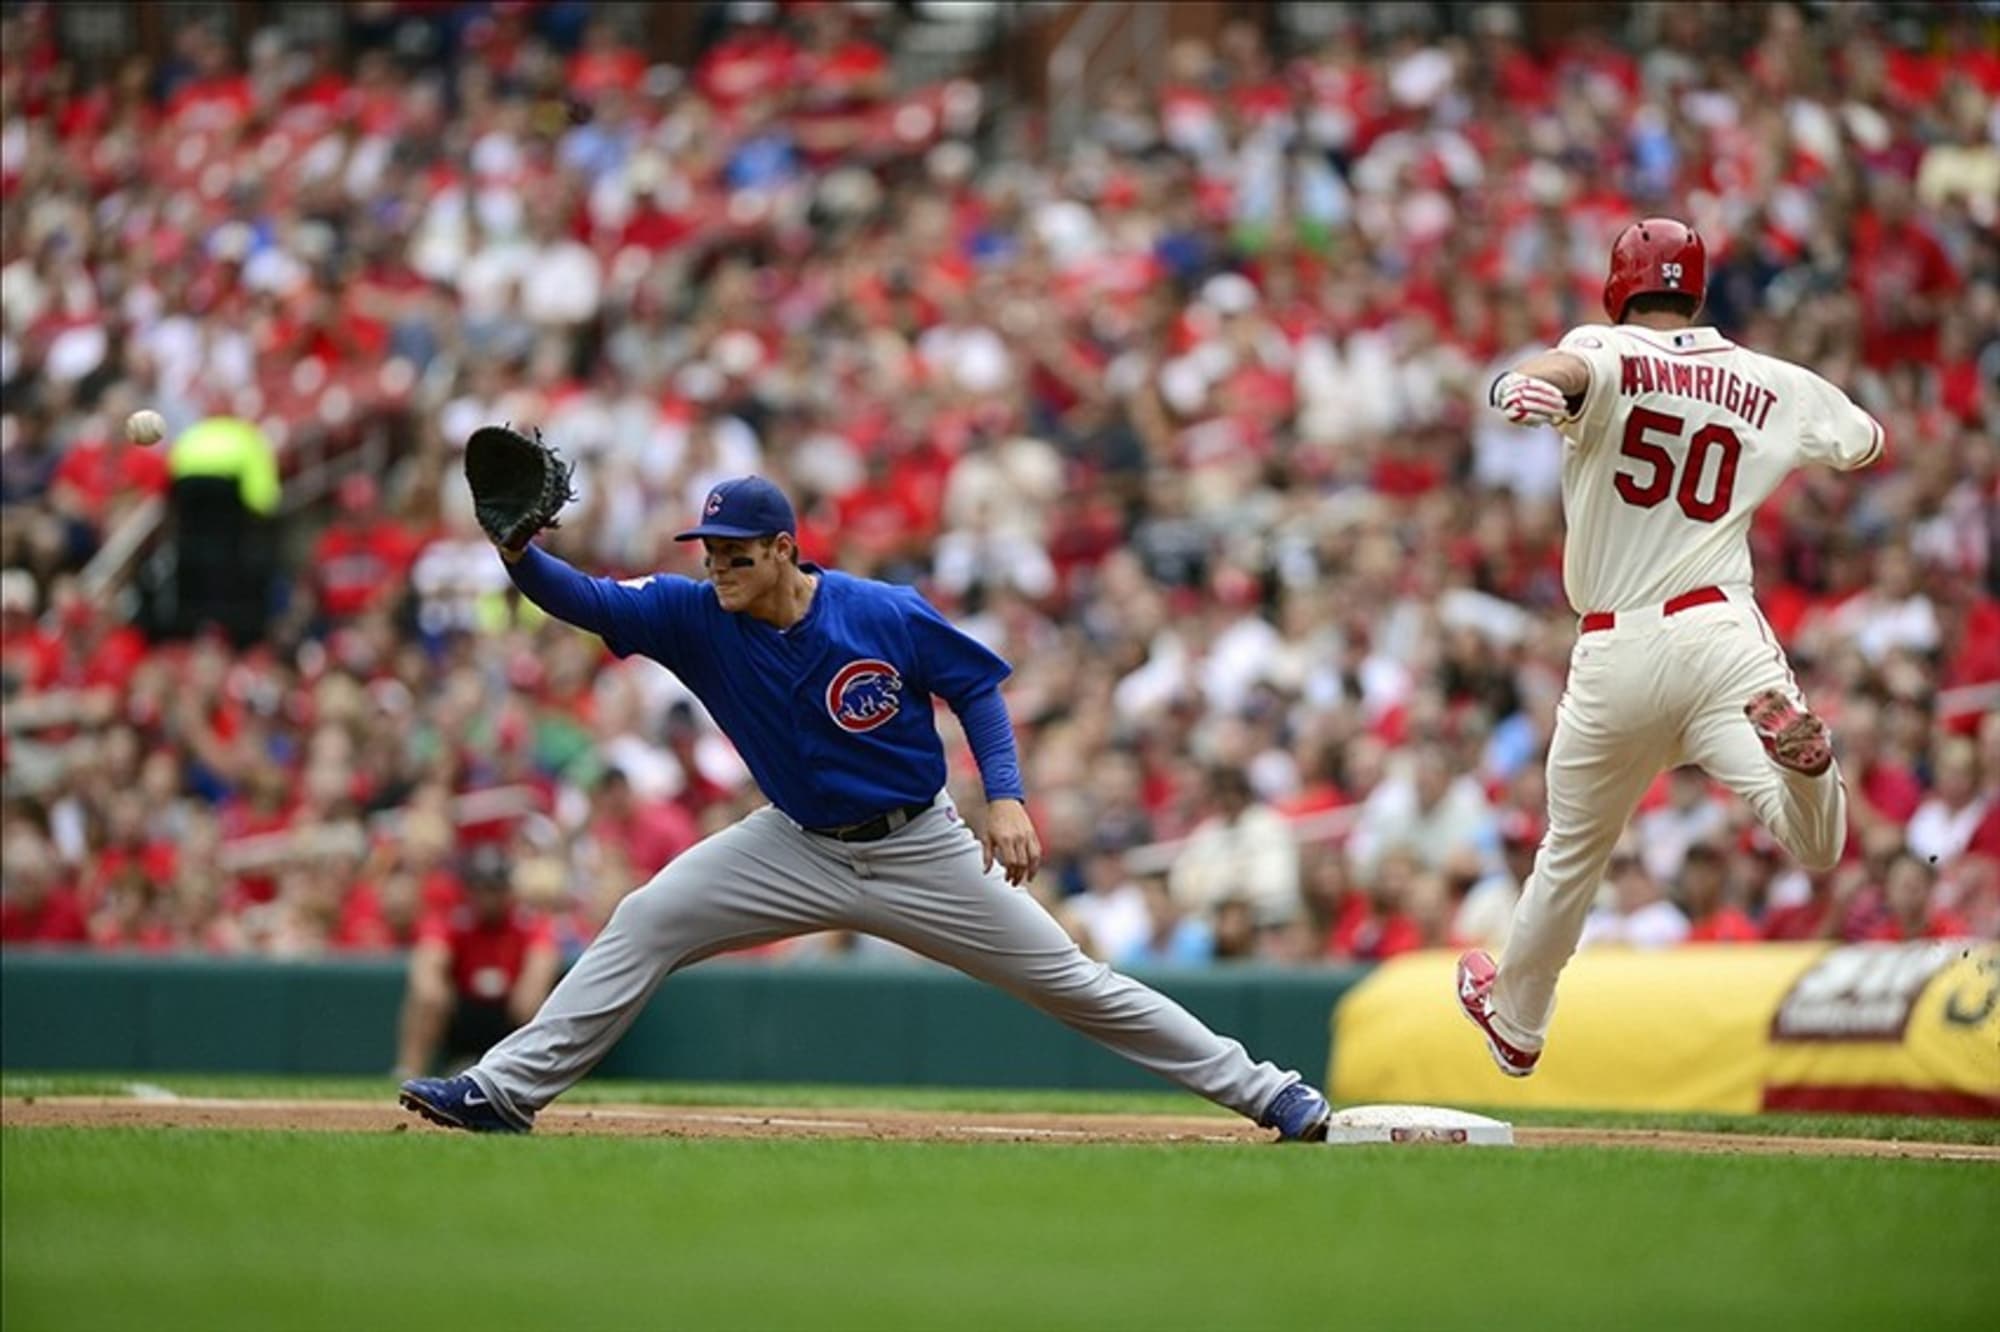 Cubs vs. Cardinals A brief history of baseball's midwest rivalry